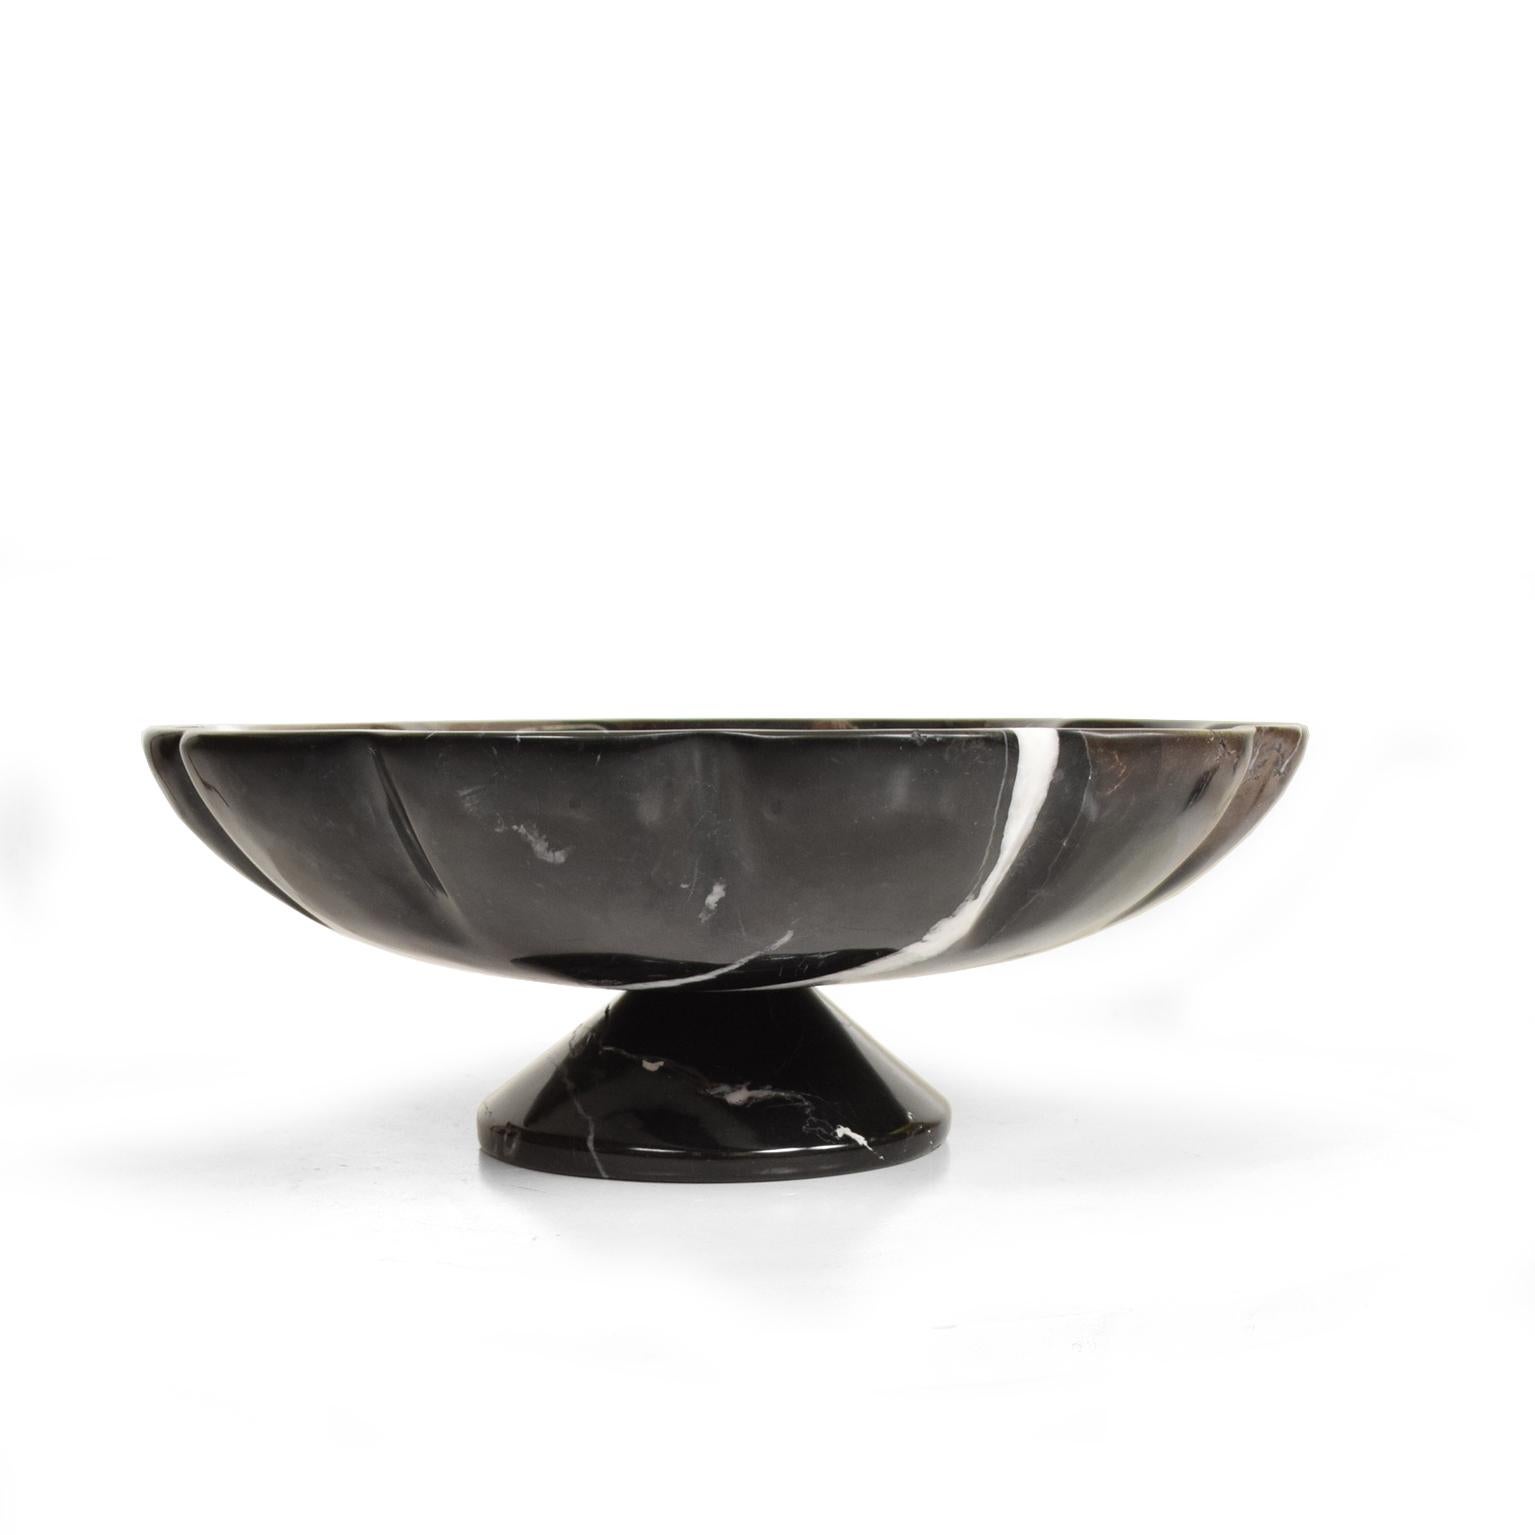 For your consideration, a Mid-Century Modern Decorative Italian Black Marble Fruit Bowl After Mangiarotti.
Made in Italy circa the 1960's. Sculptural and unique shape. Beautiful grain. Professionally polished and sealed. 
Unmarked. 
Dimensions: